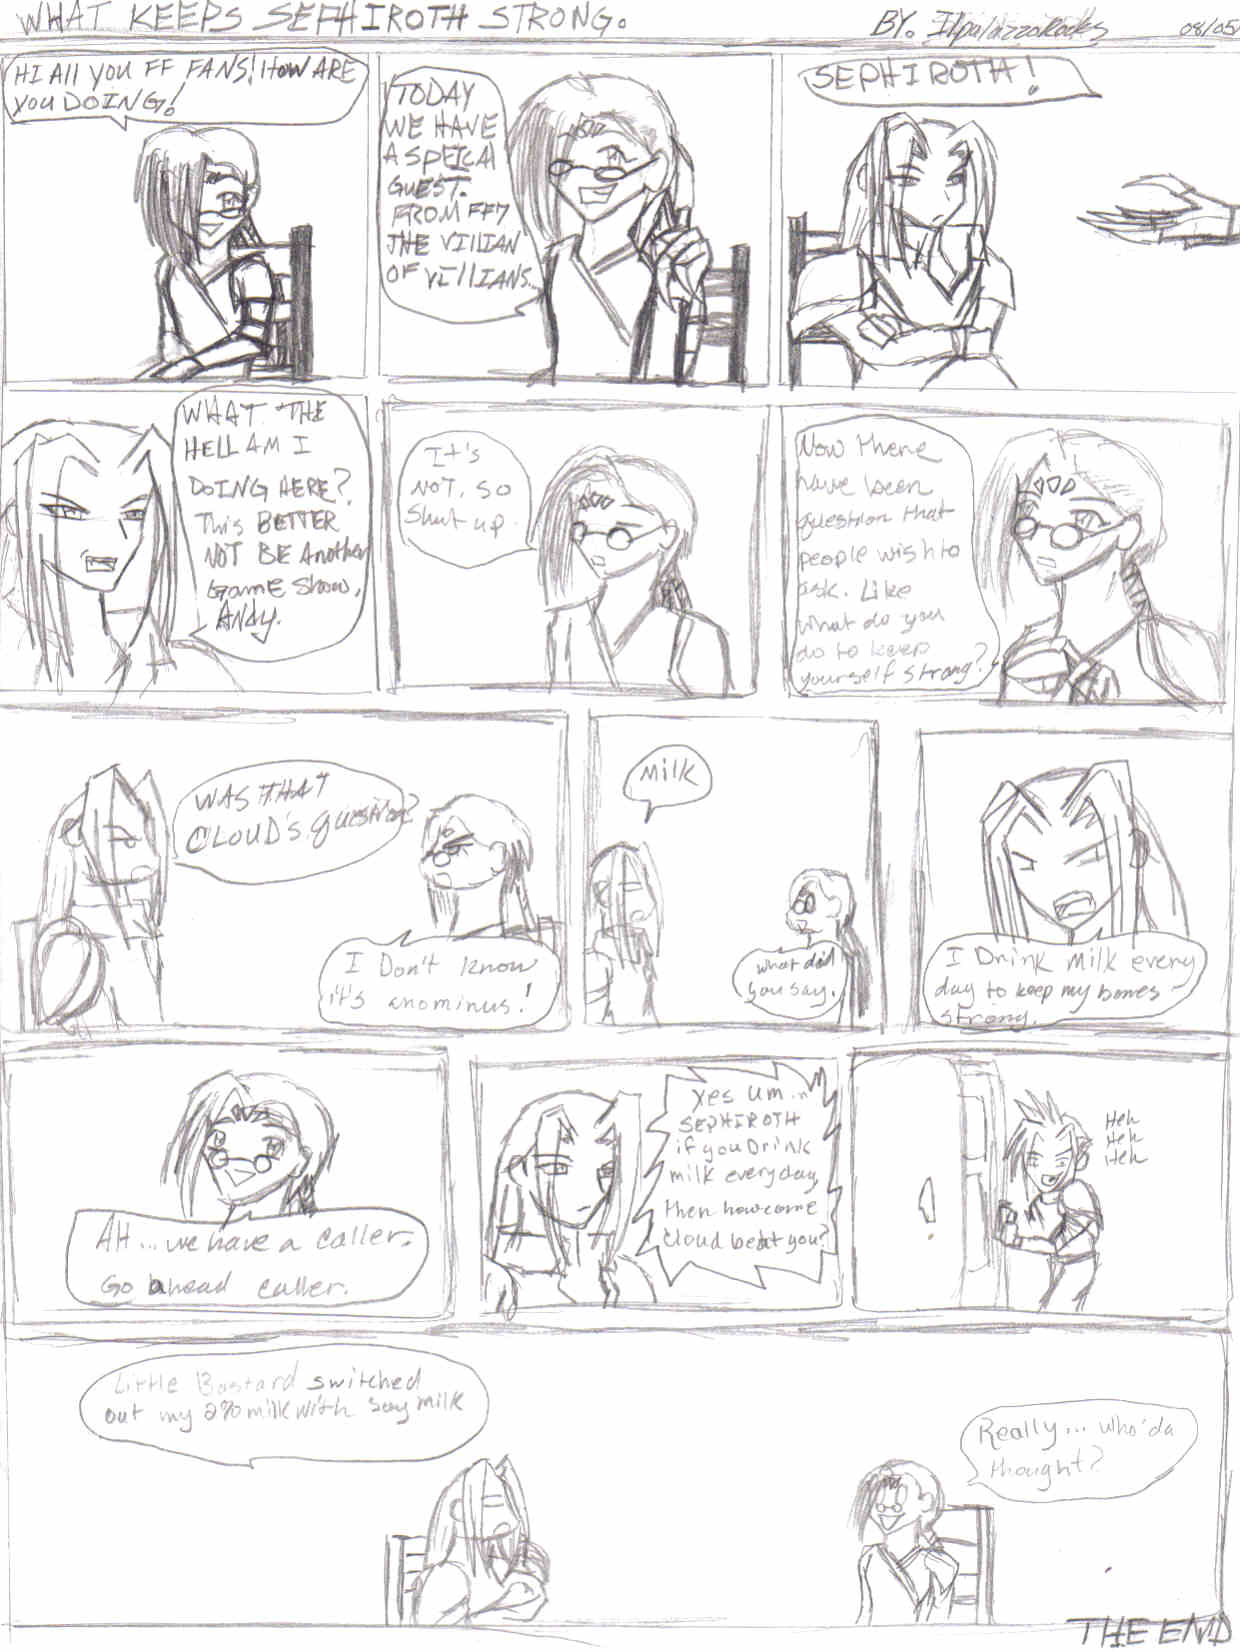 What keeps Sephiroth strong by Ilpalazzorocks